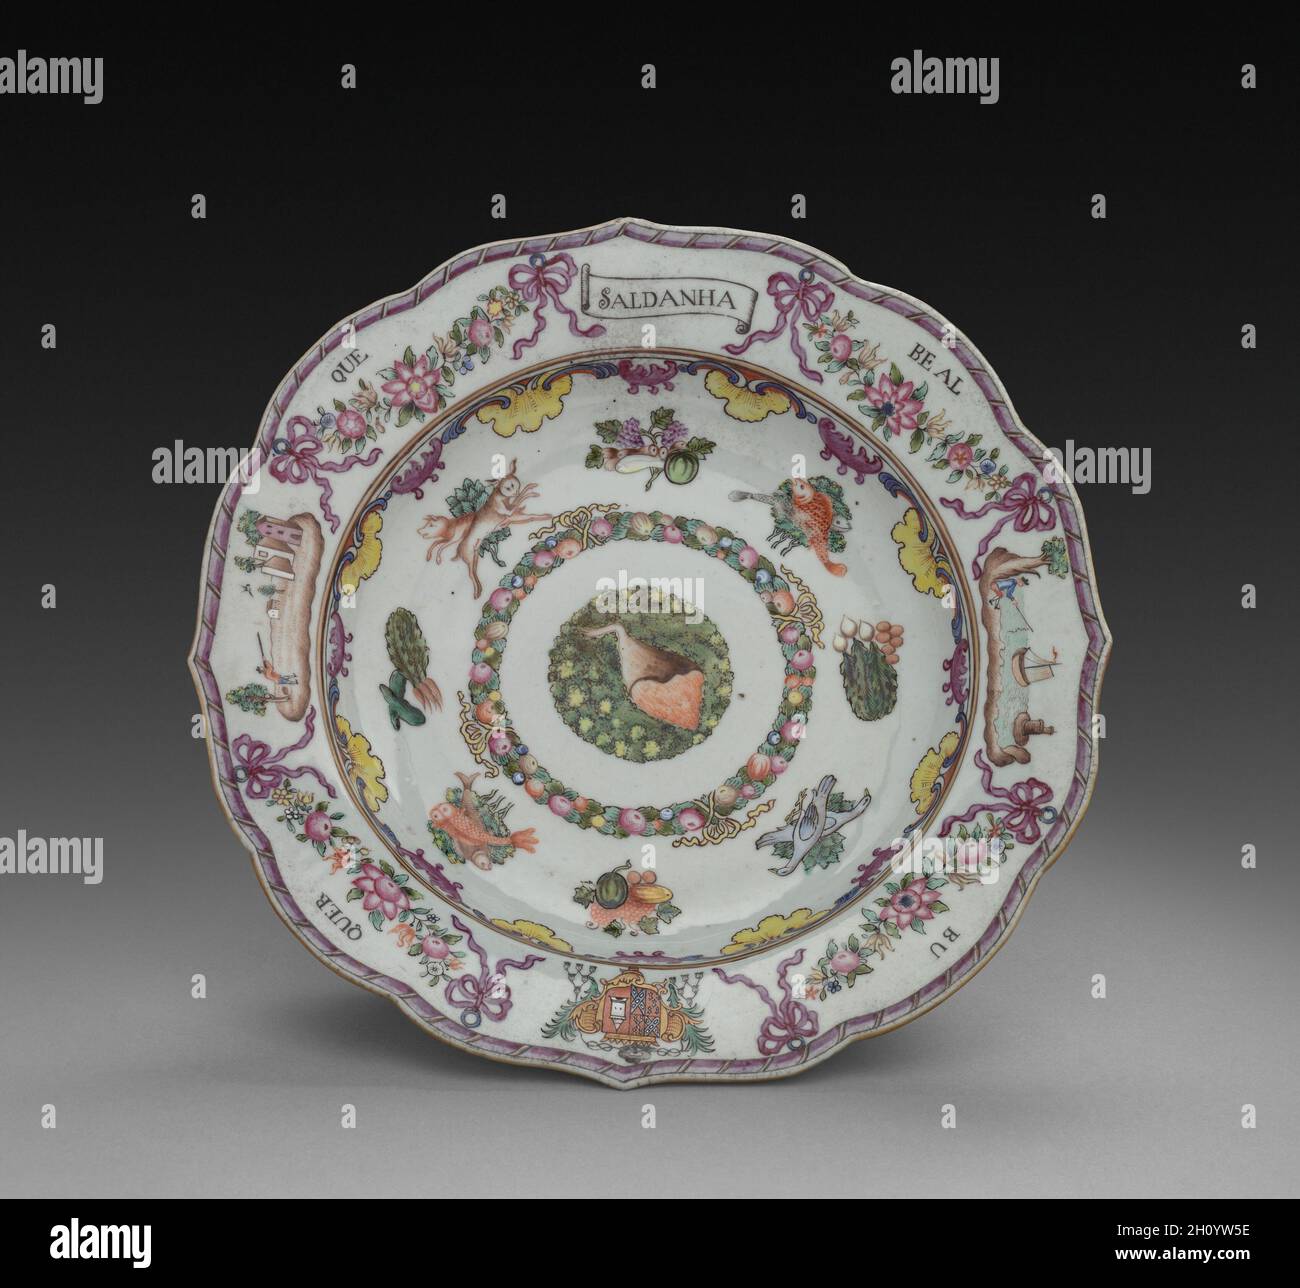 Soup Plate, ca. 1750, Porcelain, other: 9 in. (22.9 cm), Made in